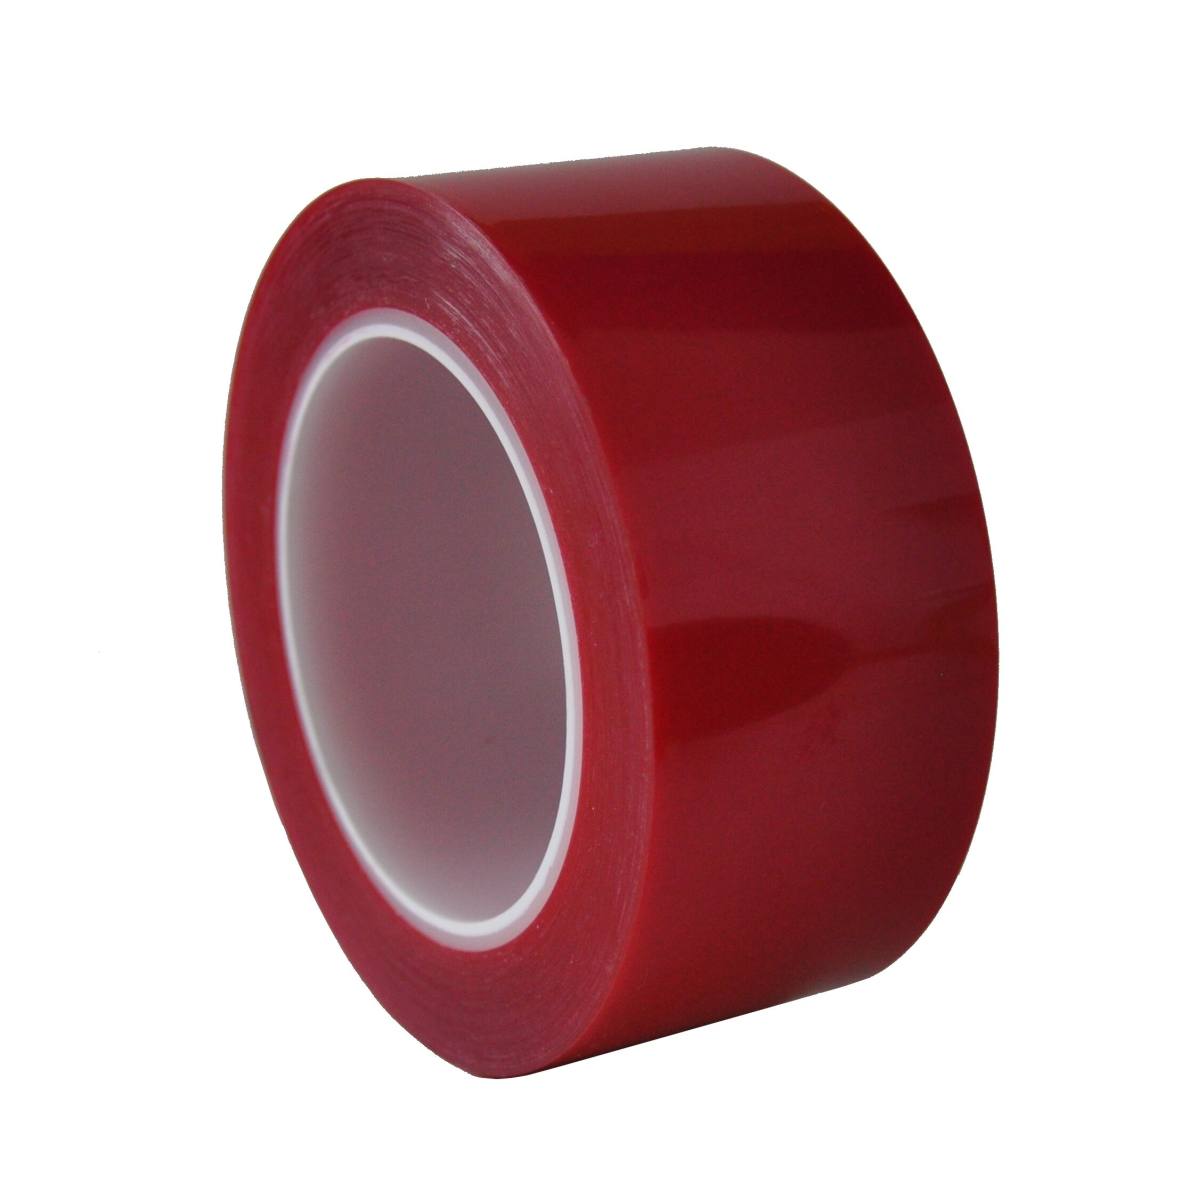 S-K-S 208R polyester plakband, 15mmx66m, rood